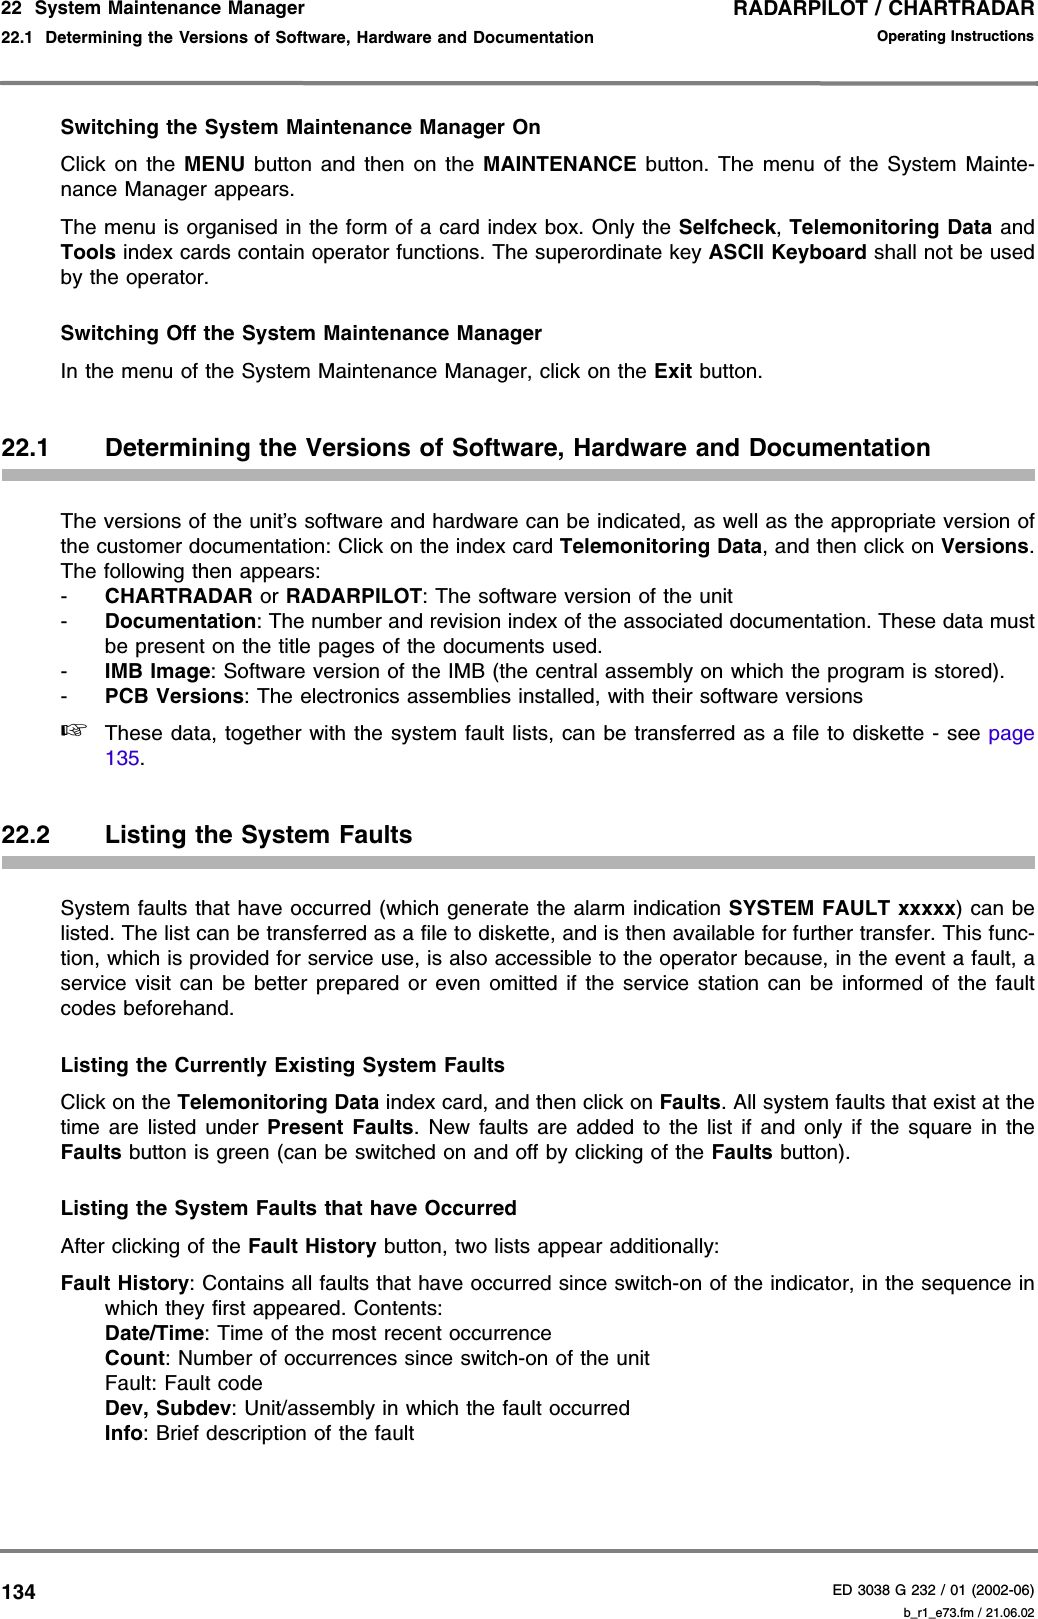 RADARPILOT / CHARTRADARED 3038 G 232 / 01 (2002-06)Operating Instructions22  System Maintenance Manager22.1  Determining the Versions of Software, Hardware and Documentation b_r1_e73.fm / 21.06.02134Switching the System Maintenance Manager OnClick on the MENU button and then on the MAINTENANCE button. The menu of the System Mainte-nance Manager appears.The menu is organised in the form of a card index box. Only the Selfcheck, Telemonitoring Data andTools index cards contain operator functions. The superordinate key ASCII Keyboard shall not be usedby the operator.Switching Off the System Maintenance ManagerIn the menu of the System Maintenance Manager, click on the Exit button.22.1 Determining the Versions of Software, Hardware and DocumentationThe versions of the unit’s software and hardware can be indicated, as well as the appropriate version ofthe customer documentation: Click on the index card Telemonitoring Data, and then click on Versions.The following then appears:-CHARTRADAR or RADARPILOT: The software version of the unit-Documentation: The number and revision index of the associated documentation. These data mustbe present on the title pages of the documents used.-IMB Image: Software version of the IMB (the central assembly on which the program is stored).-PCB Versions: The electronics assemblies installed, with their software versions☞These data, together with the system fault lists, can be transferred as a file to diskette - see page135.22.2 Listing the System FaultsSystem faults that have occurred (which generate the alarm indication SYSTEM FAULT xxxxx) can belisted. The list can be transferred as a file to diskette, and is then available for further transfer. This func-tion, which is provided for service use, is also accessible to the operator because, in the event a fault, aservice visit can be better prepared or even omitted if the service station can be informed of the faultcodes beforehand.Listing the Currently Existing System FaultsClick on the Telemonitoring Data index card, and then click on Faults. All system faults that exist at thetime are listed under Present Faults. New faults are added to the list if and only if the square in theFaults button is green (can be switched on and off by clicking of the Faults button).Listing the System Faults that have OccurredAfter clicking of the Fault History button, two lists appear additionally:Fault History: Contains all faults that have occurred since switch-on of the indicator, in the sequence inwhich they first appeared. Contents:Date/Time: Time of the most recent occurrenceCount: Number of occurrences since switch-on of the unitFault: Fault codeDev, Subdev: Unit/assembly in which the fault occurredInfo: Brief description of the fault